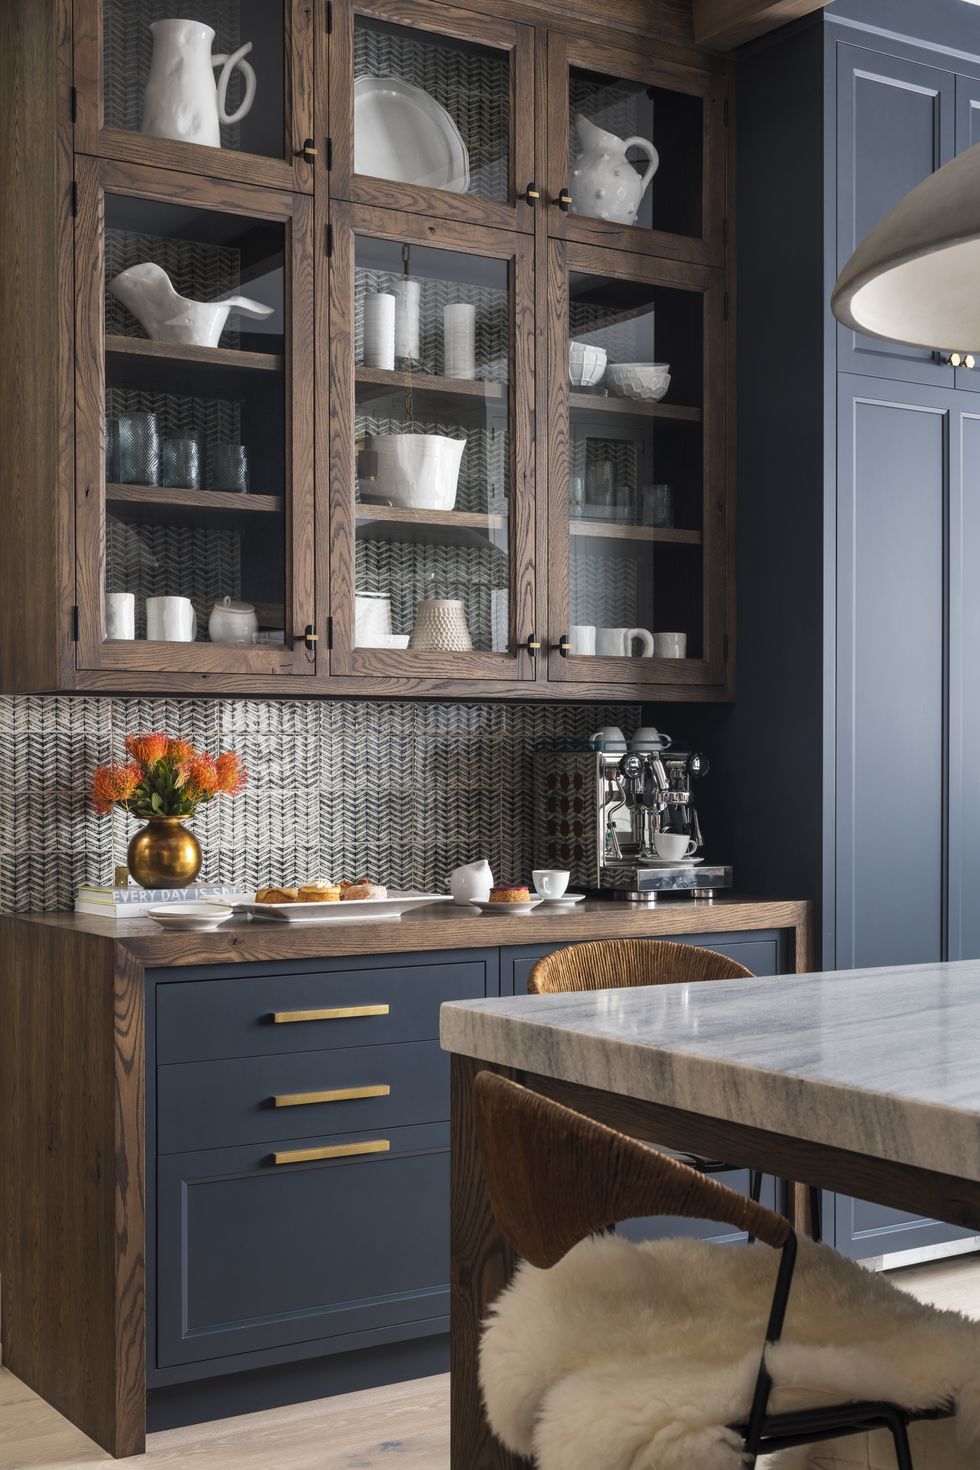 Coffee Bar Ideas: 16 Ways to Make Your Kitchen Feel Like Your